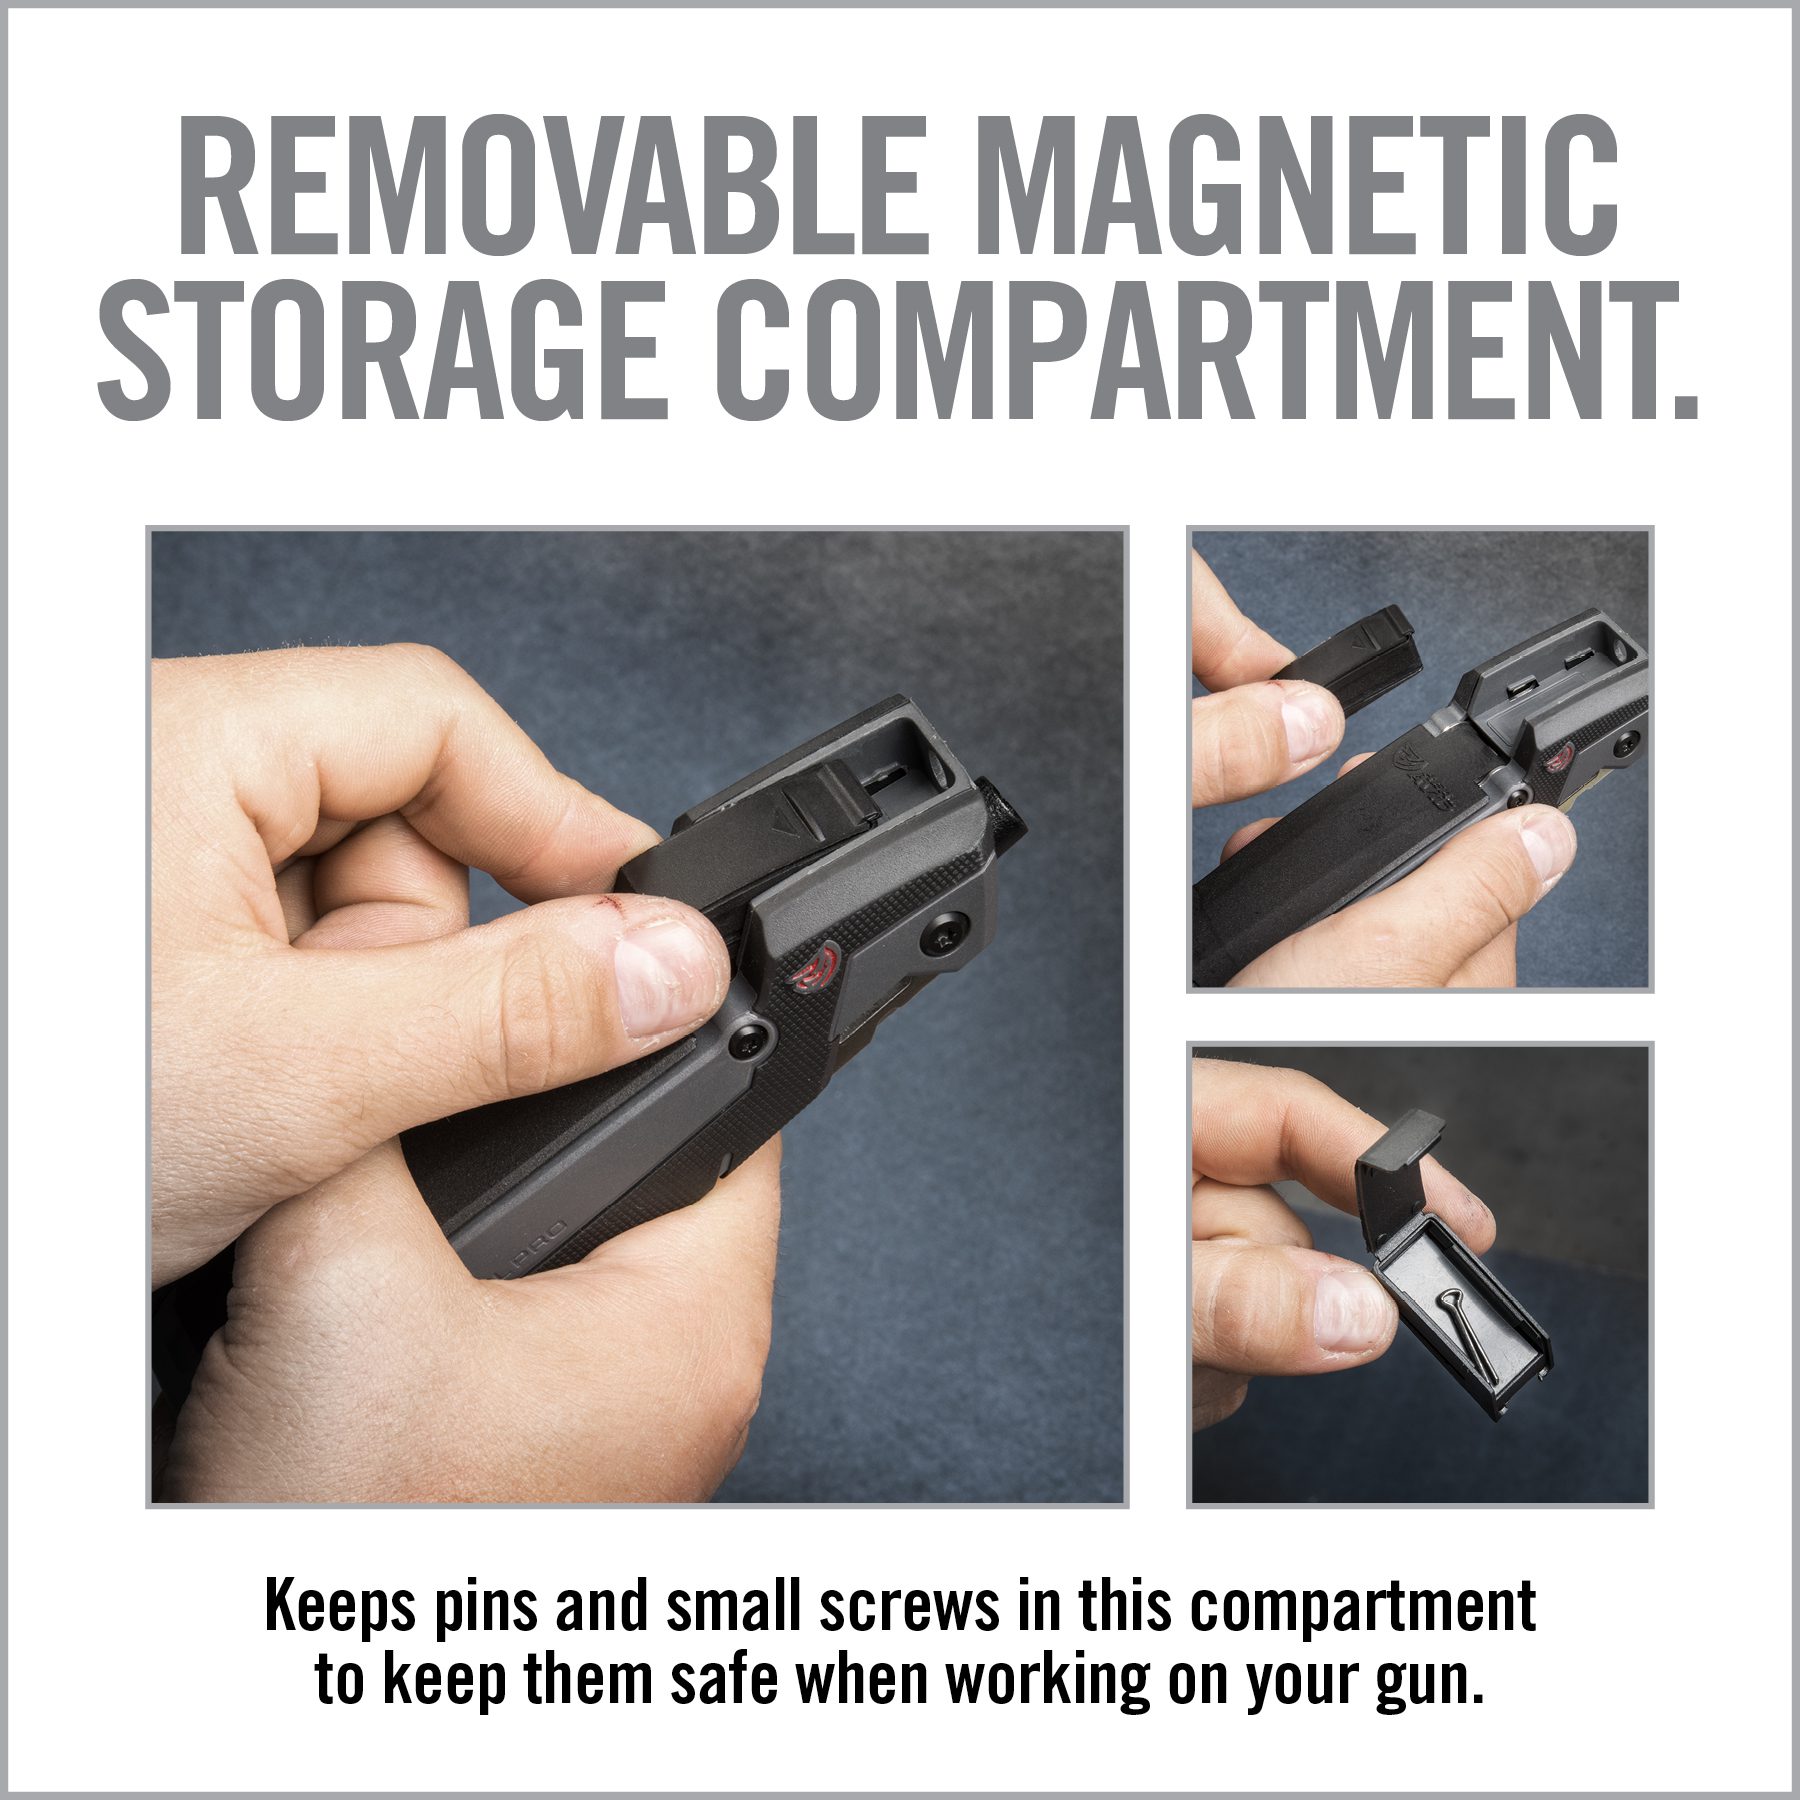 the instructions for how to remove magnetic storage compartment